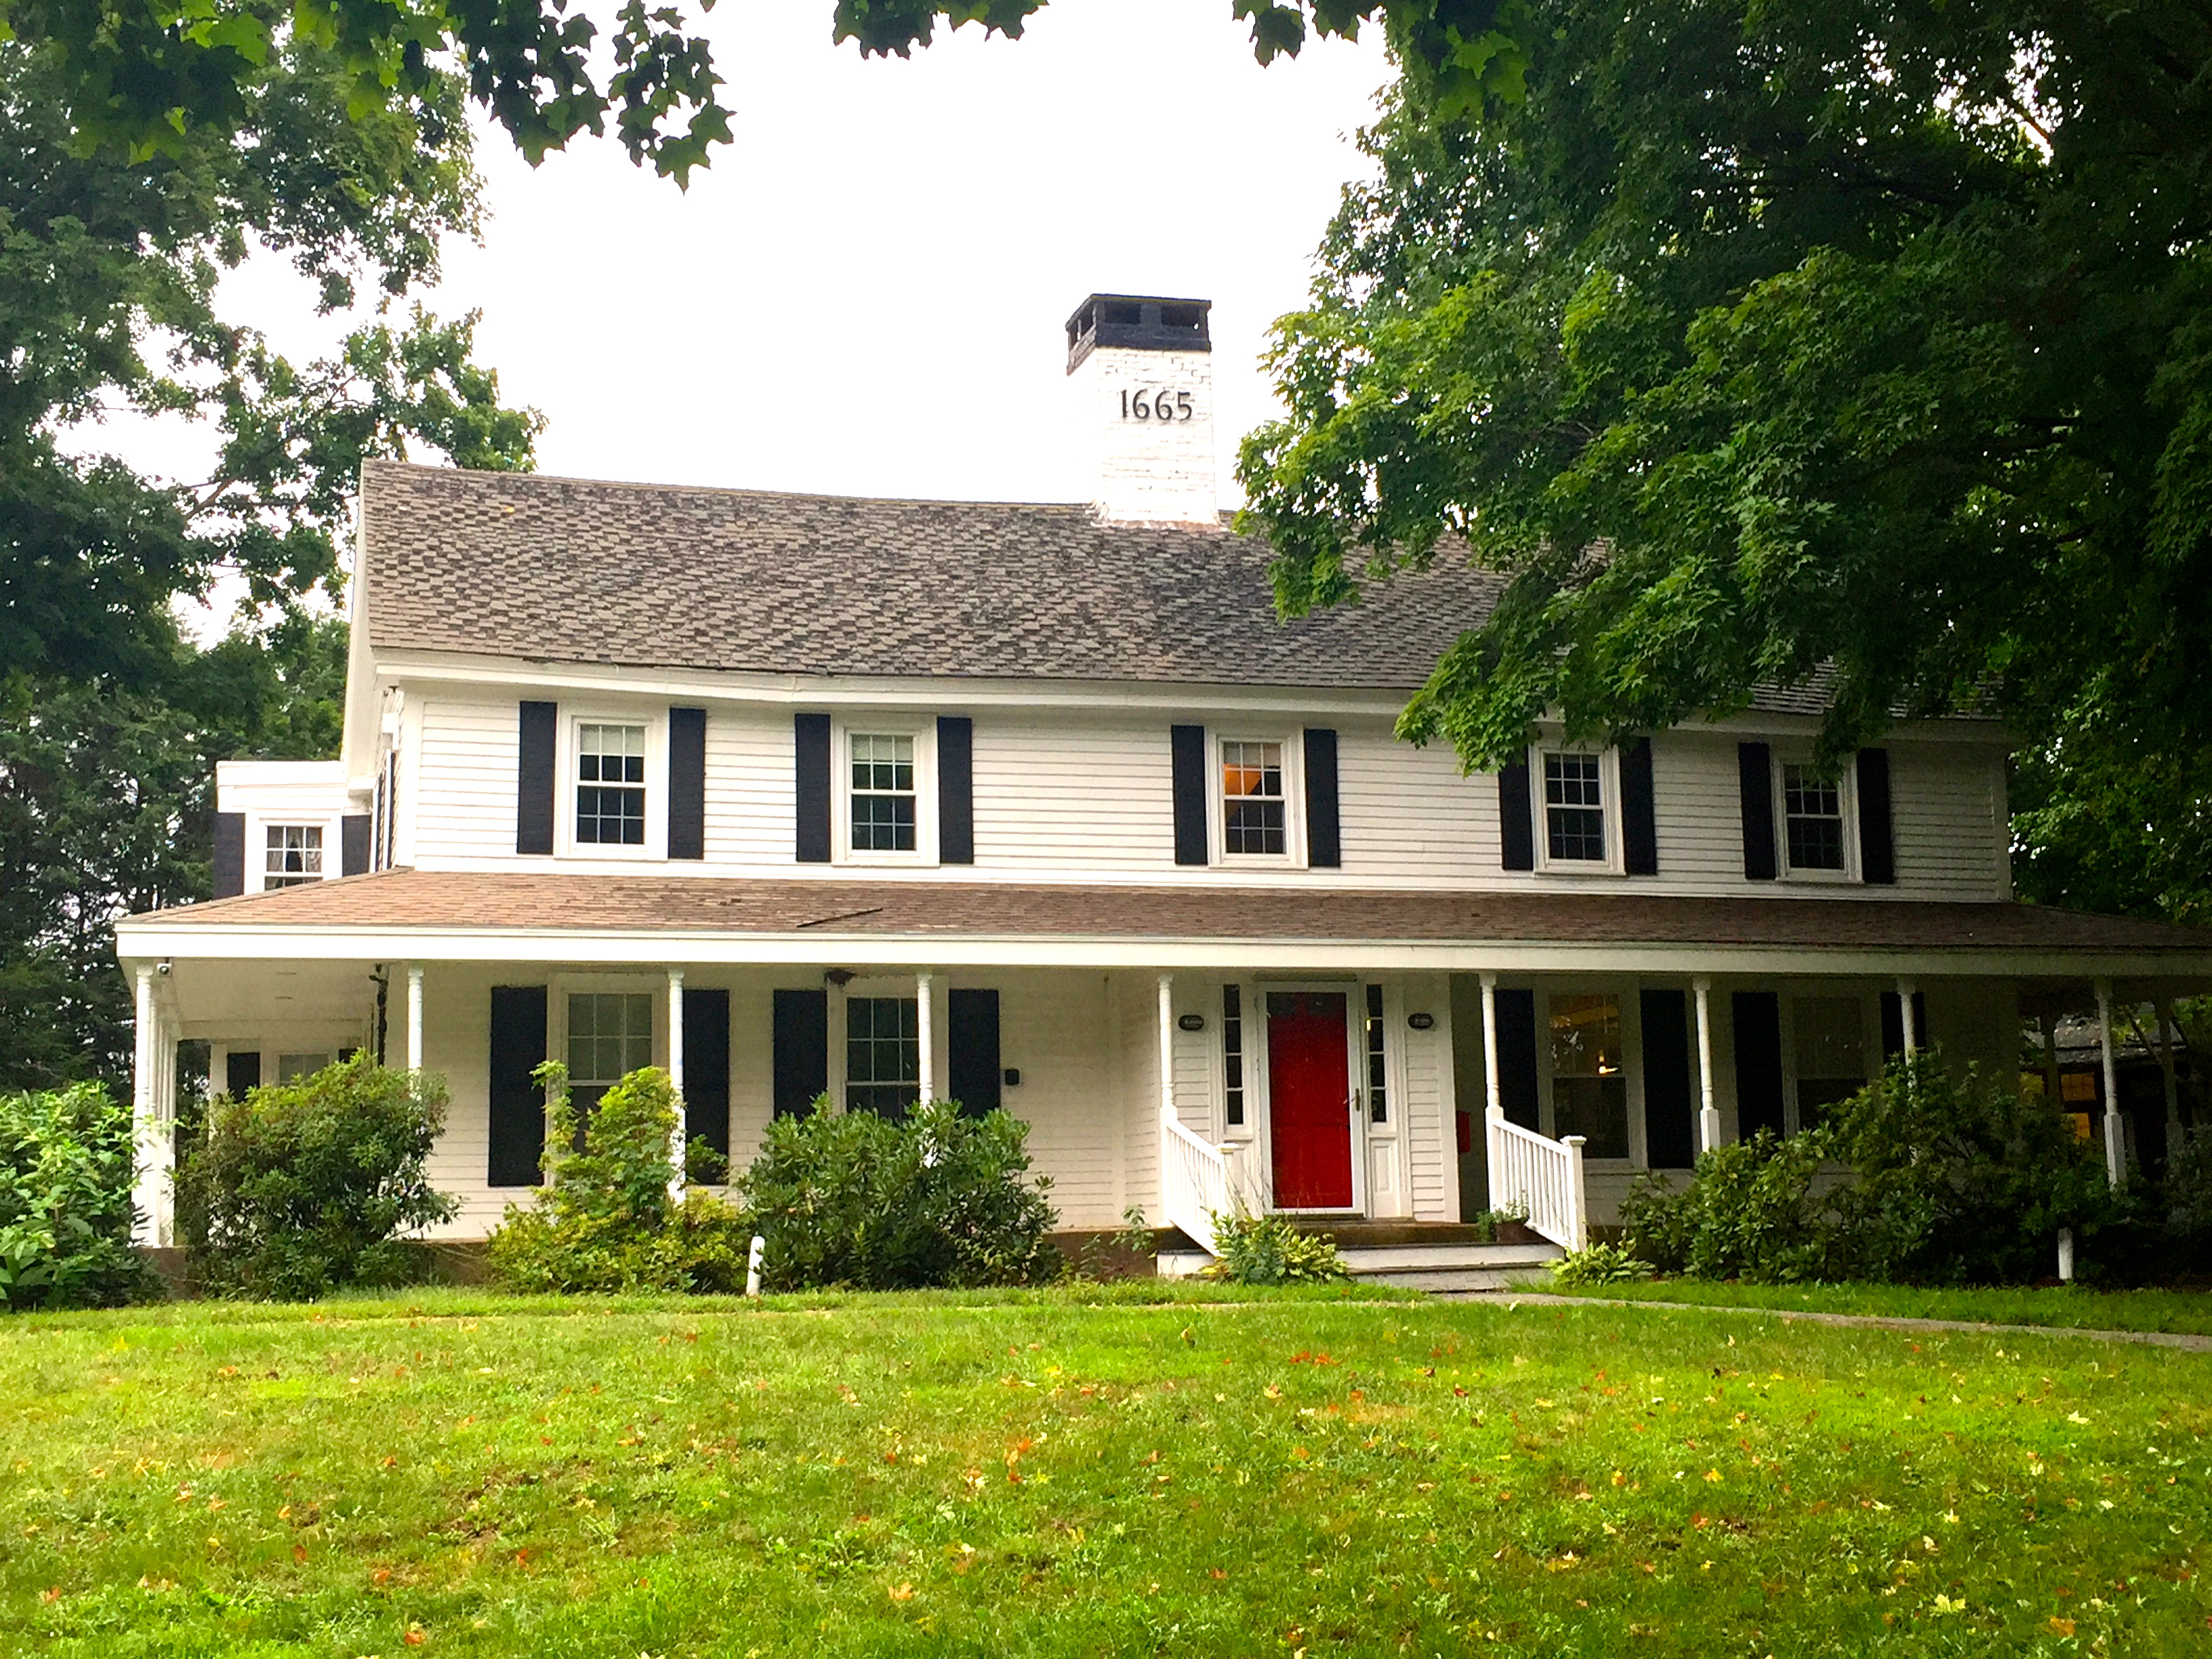 Adventures in restoring & renovating our antique farmhouse